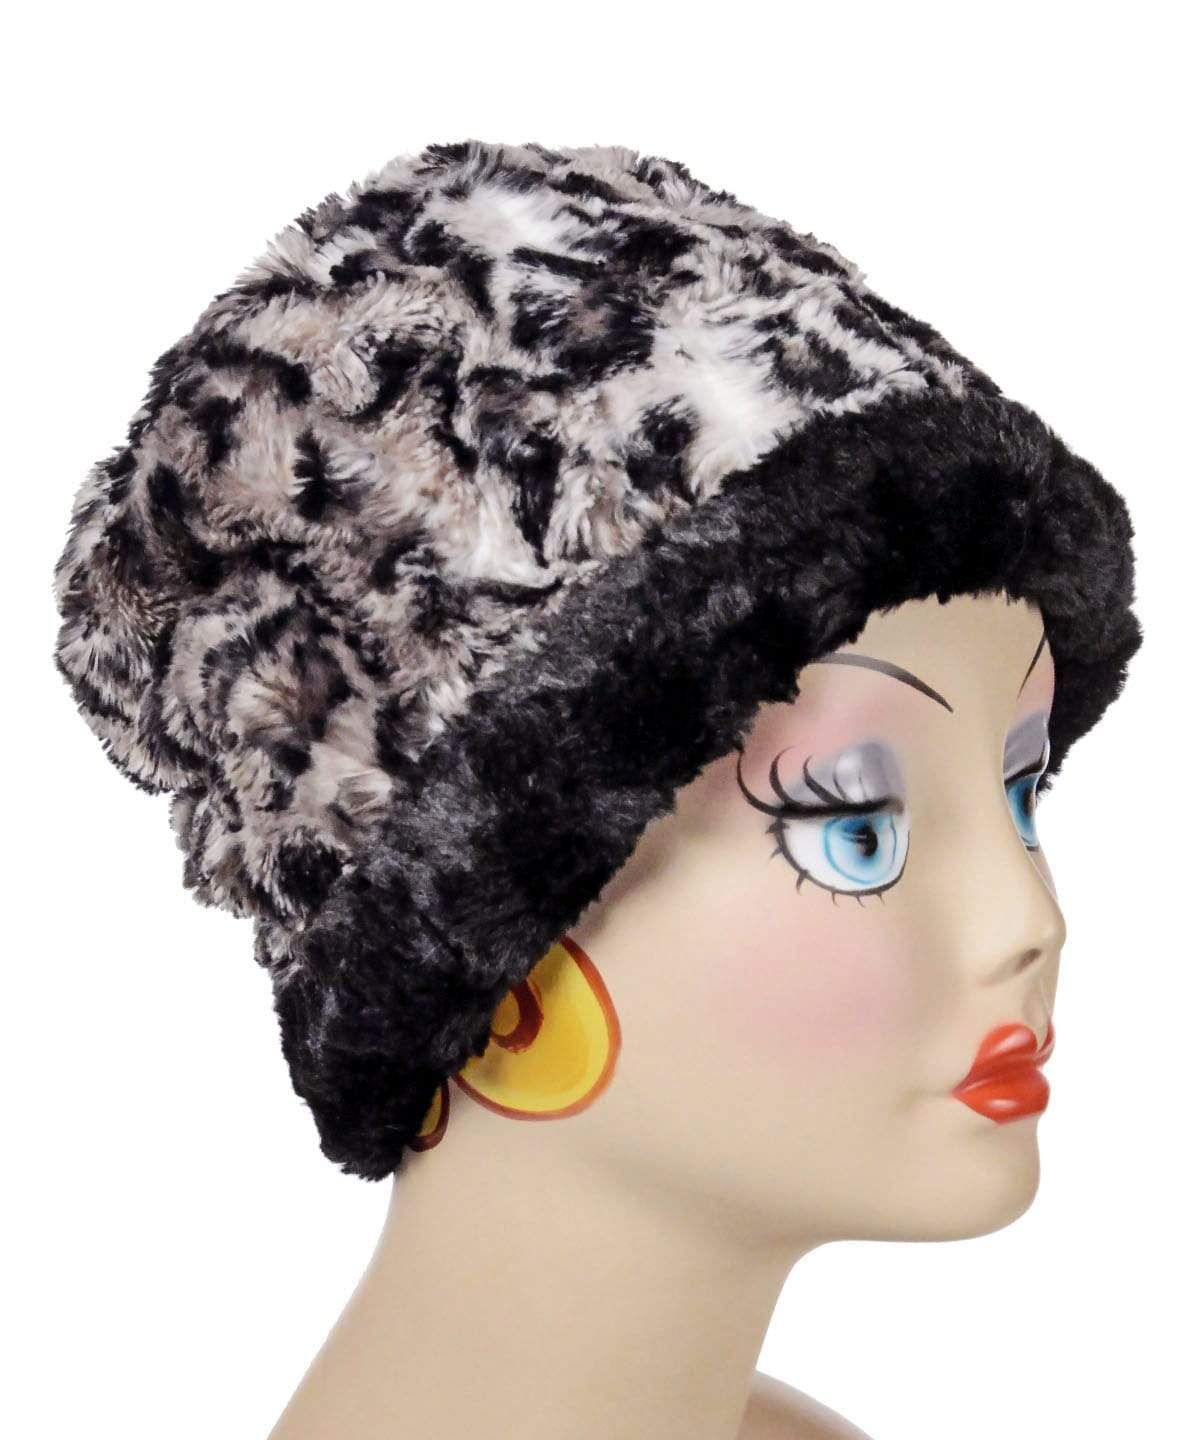   Women&#39;s Cuffed Pillbox on mannequin  shown with a short cuff | Savanah Cat  animal print Faux Fur with Cuddly Black | Handmade USA by Pandemonium Seattle